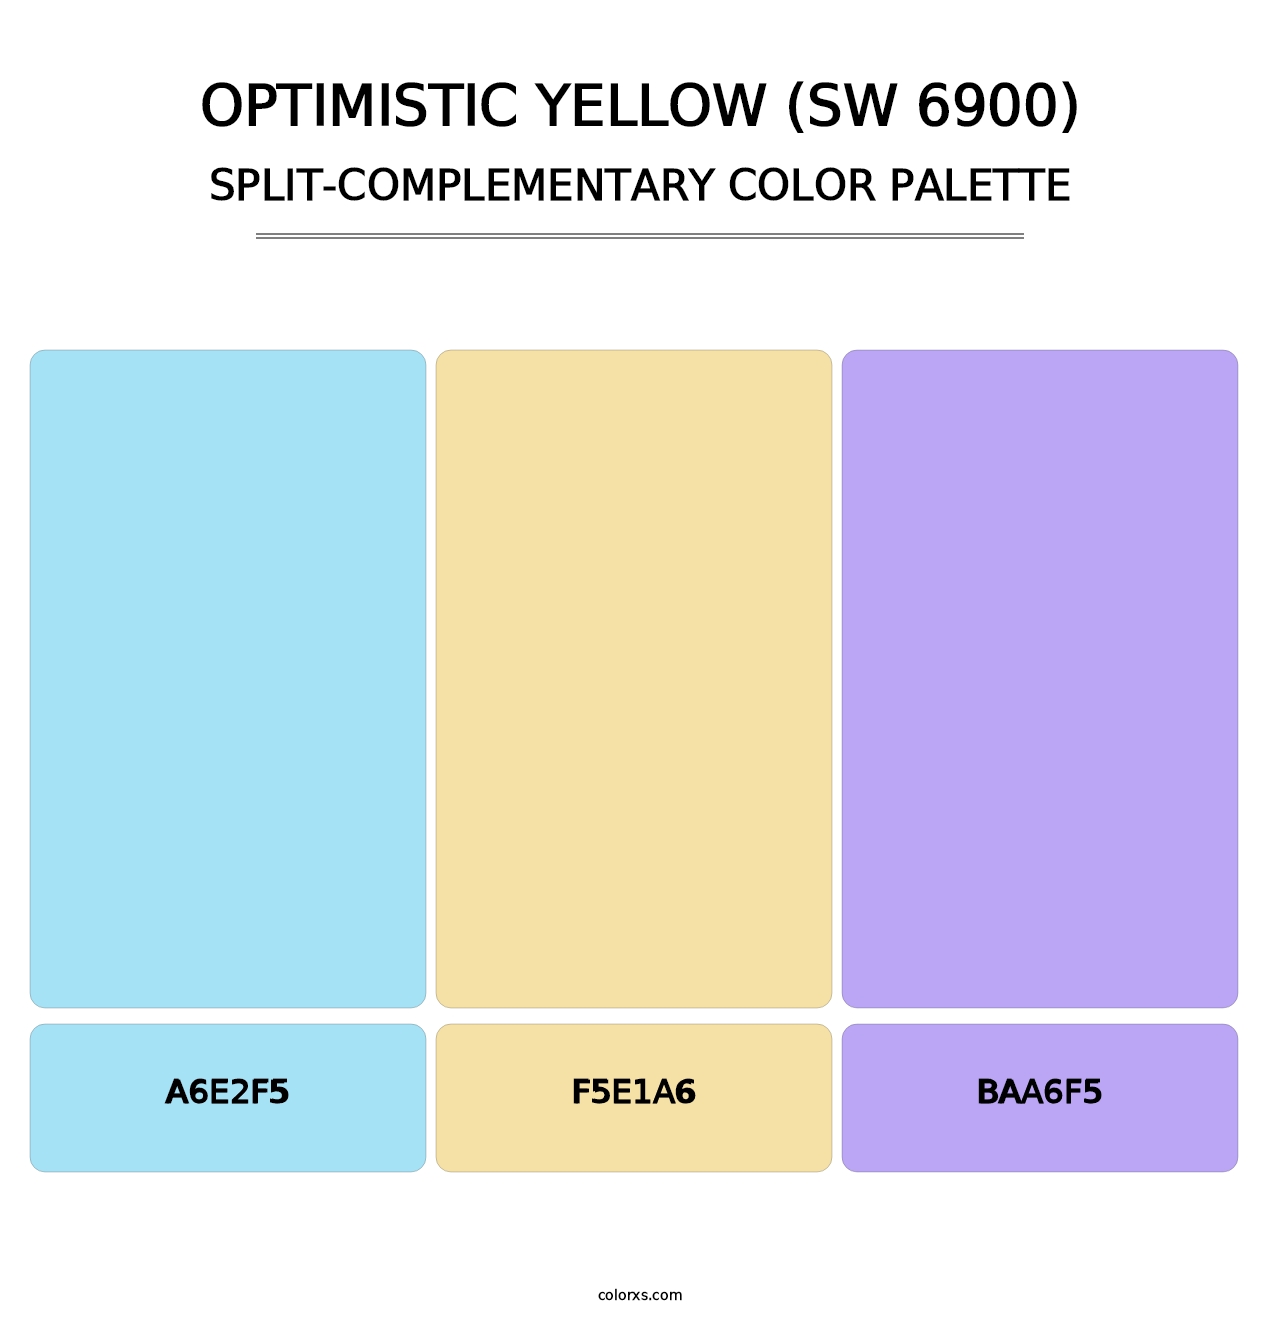 Optimistic Yellow (SW 6900) - Split-Complementary Color Palette